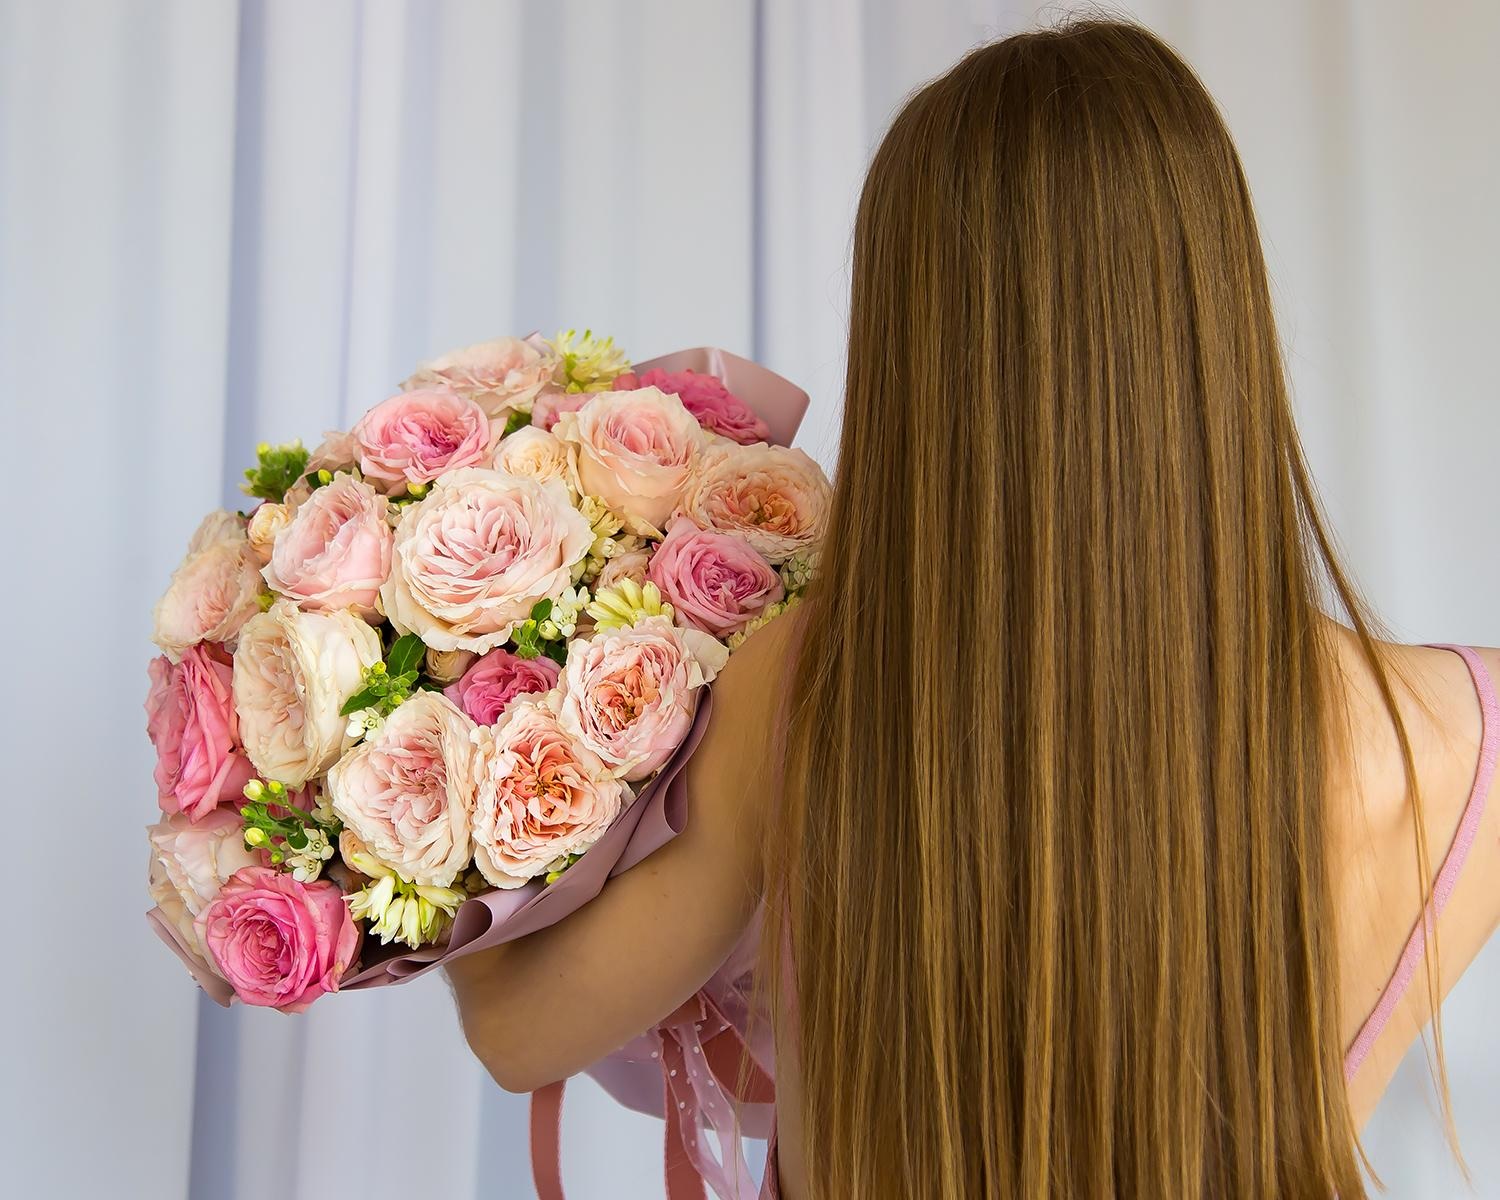 What flowers to give for Valentine's Day